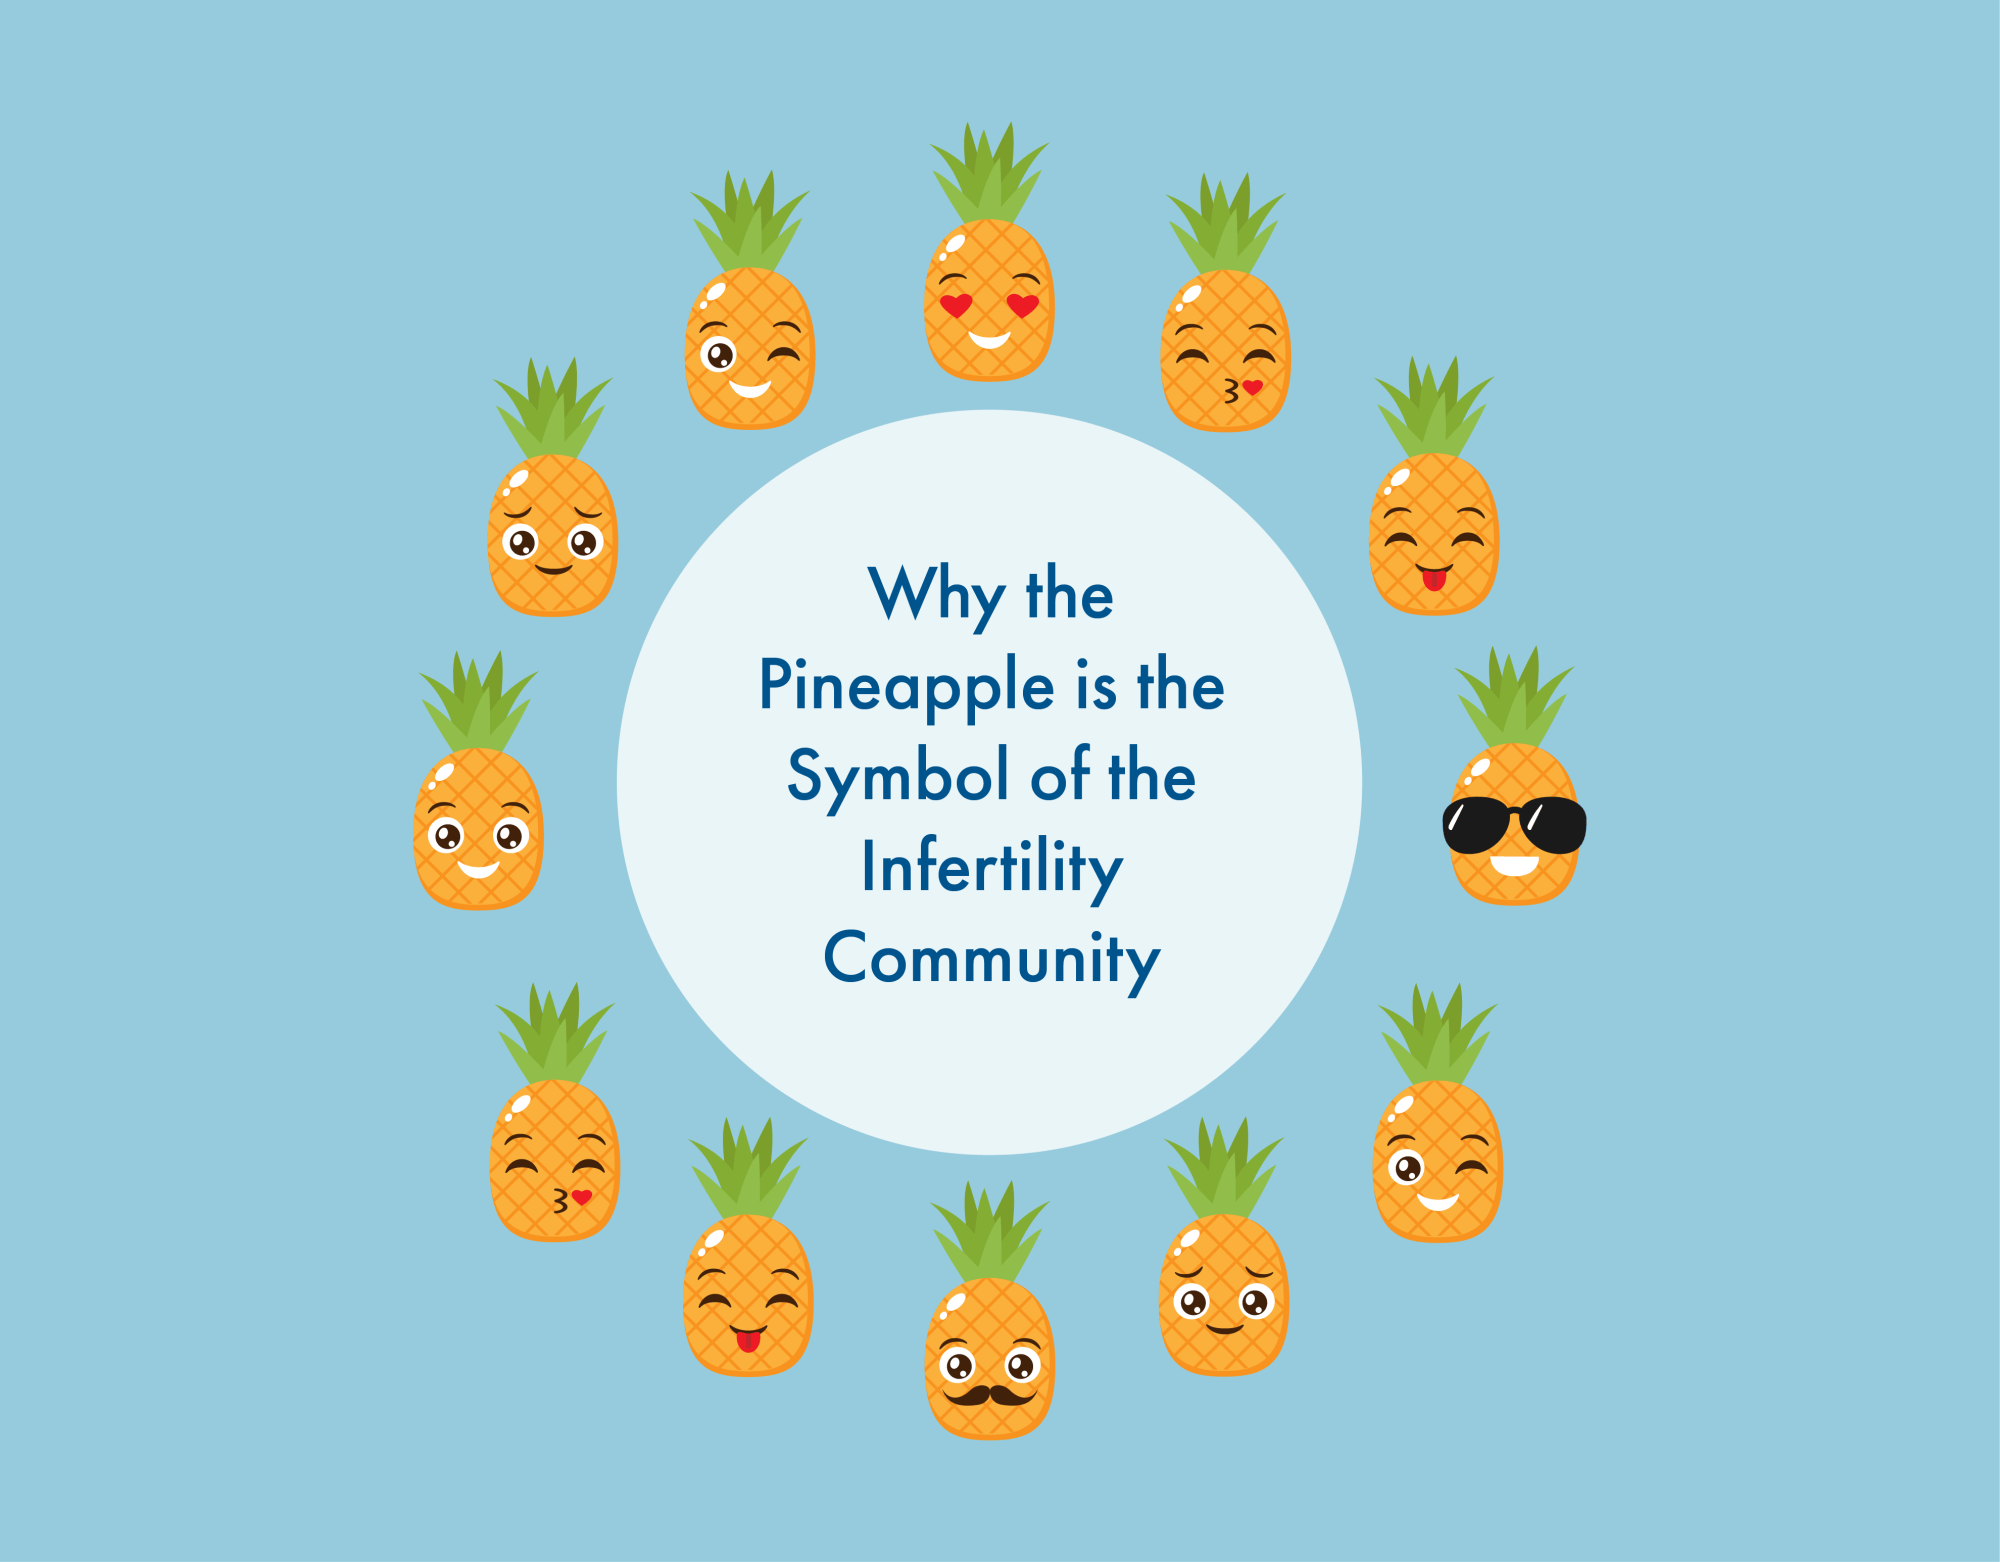 Why the Pineapple is the Symbol of the Infertility Community photo